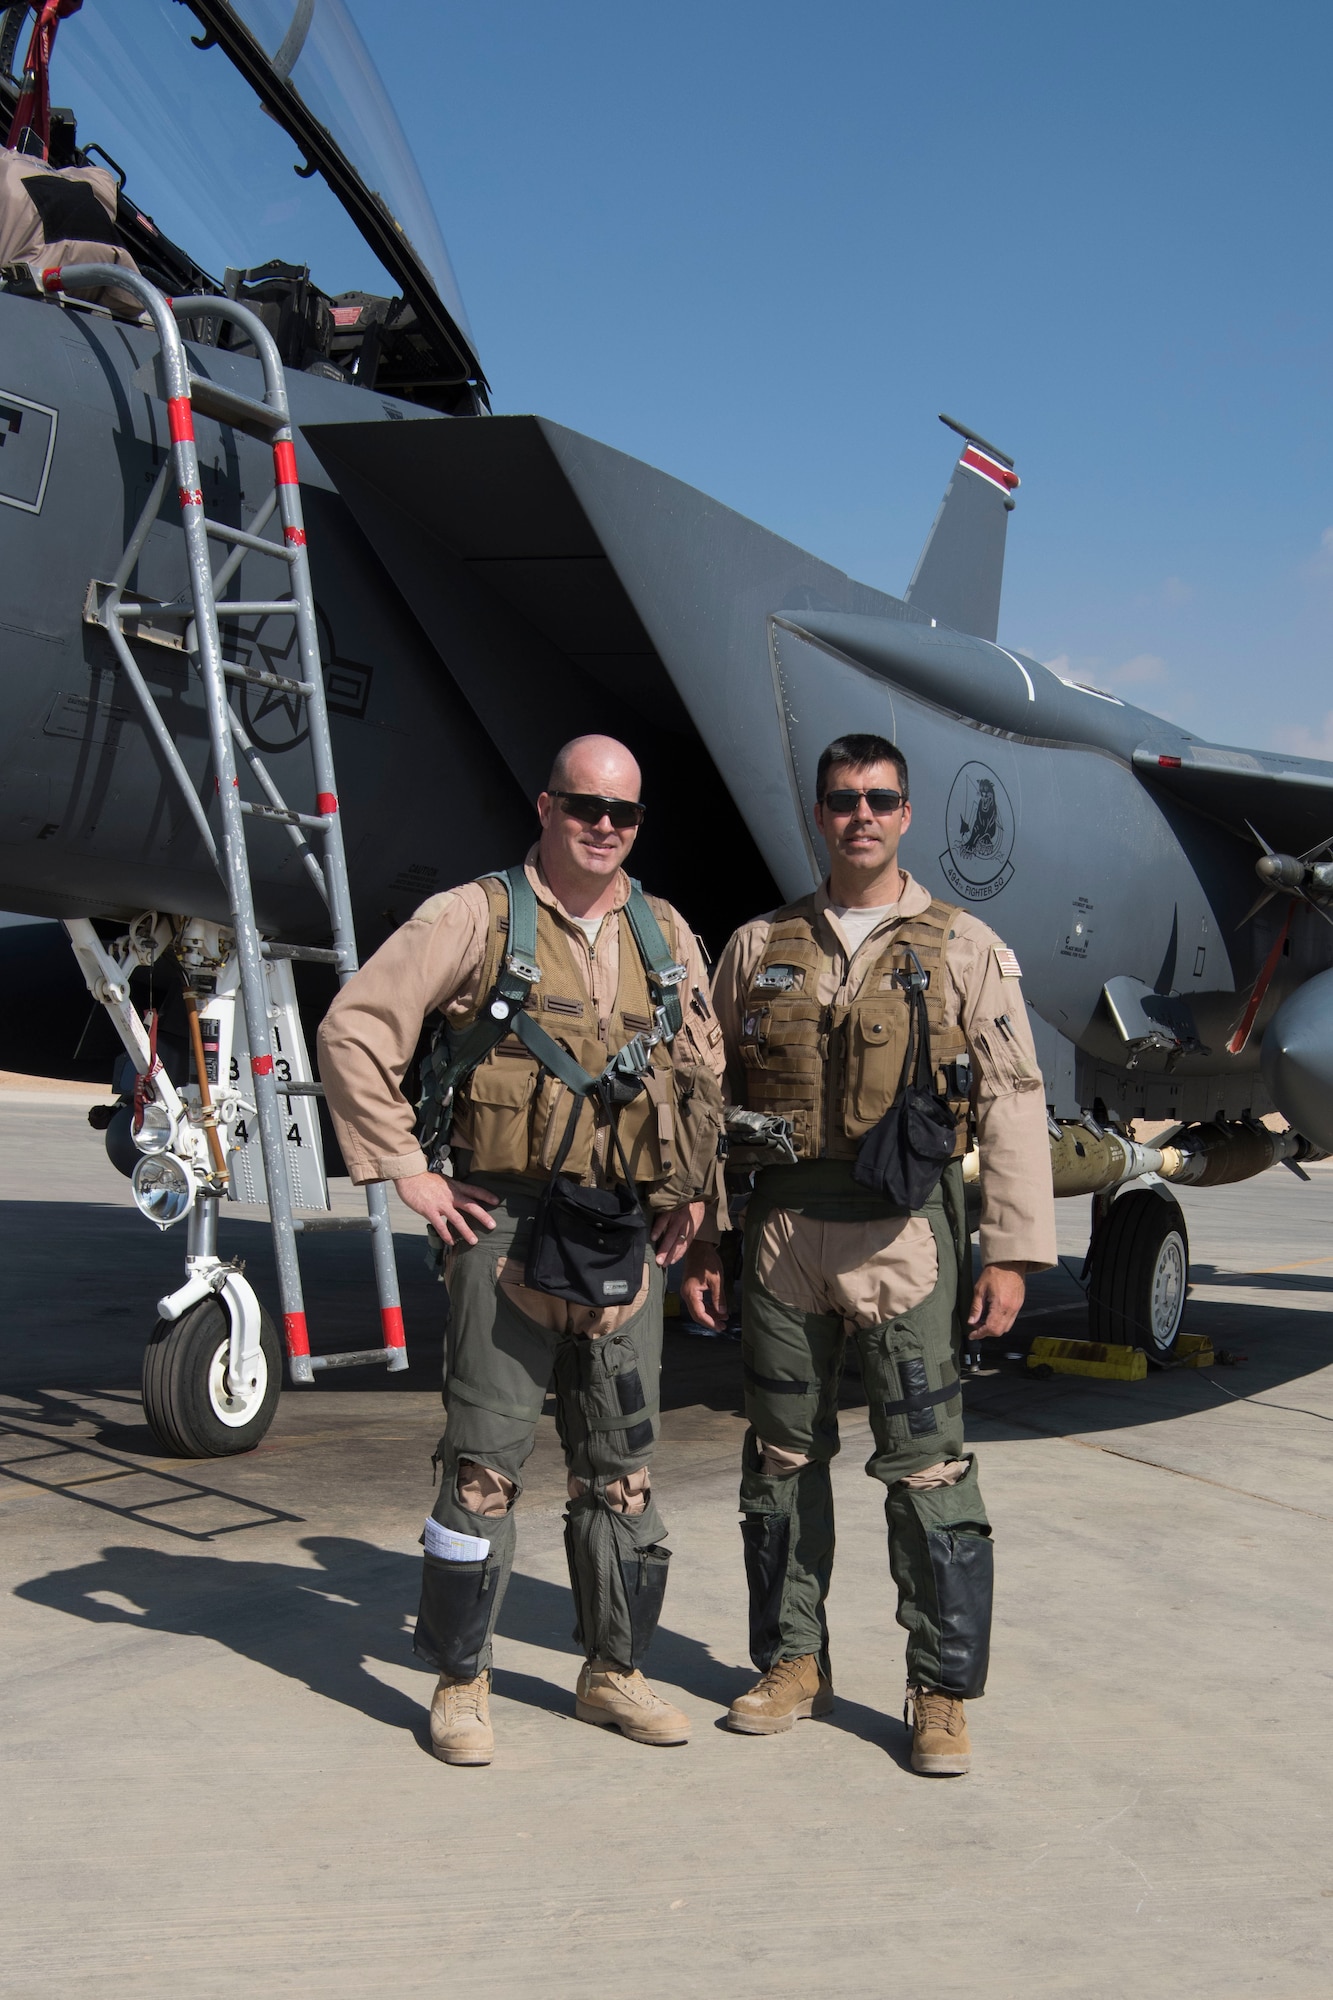 Col. William Marshall, 332nd Expeditionary Operations Group commander, and Col. Richard Goodman, 332nd Air Expeditionary Wing vice commander, stand in front of an F-15E Strike Eagle, June 2, 2018, at an undisclosed location in Southwest Asia.